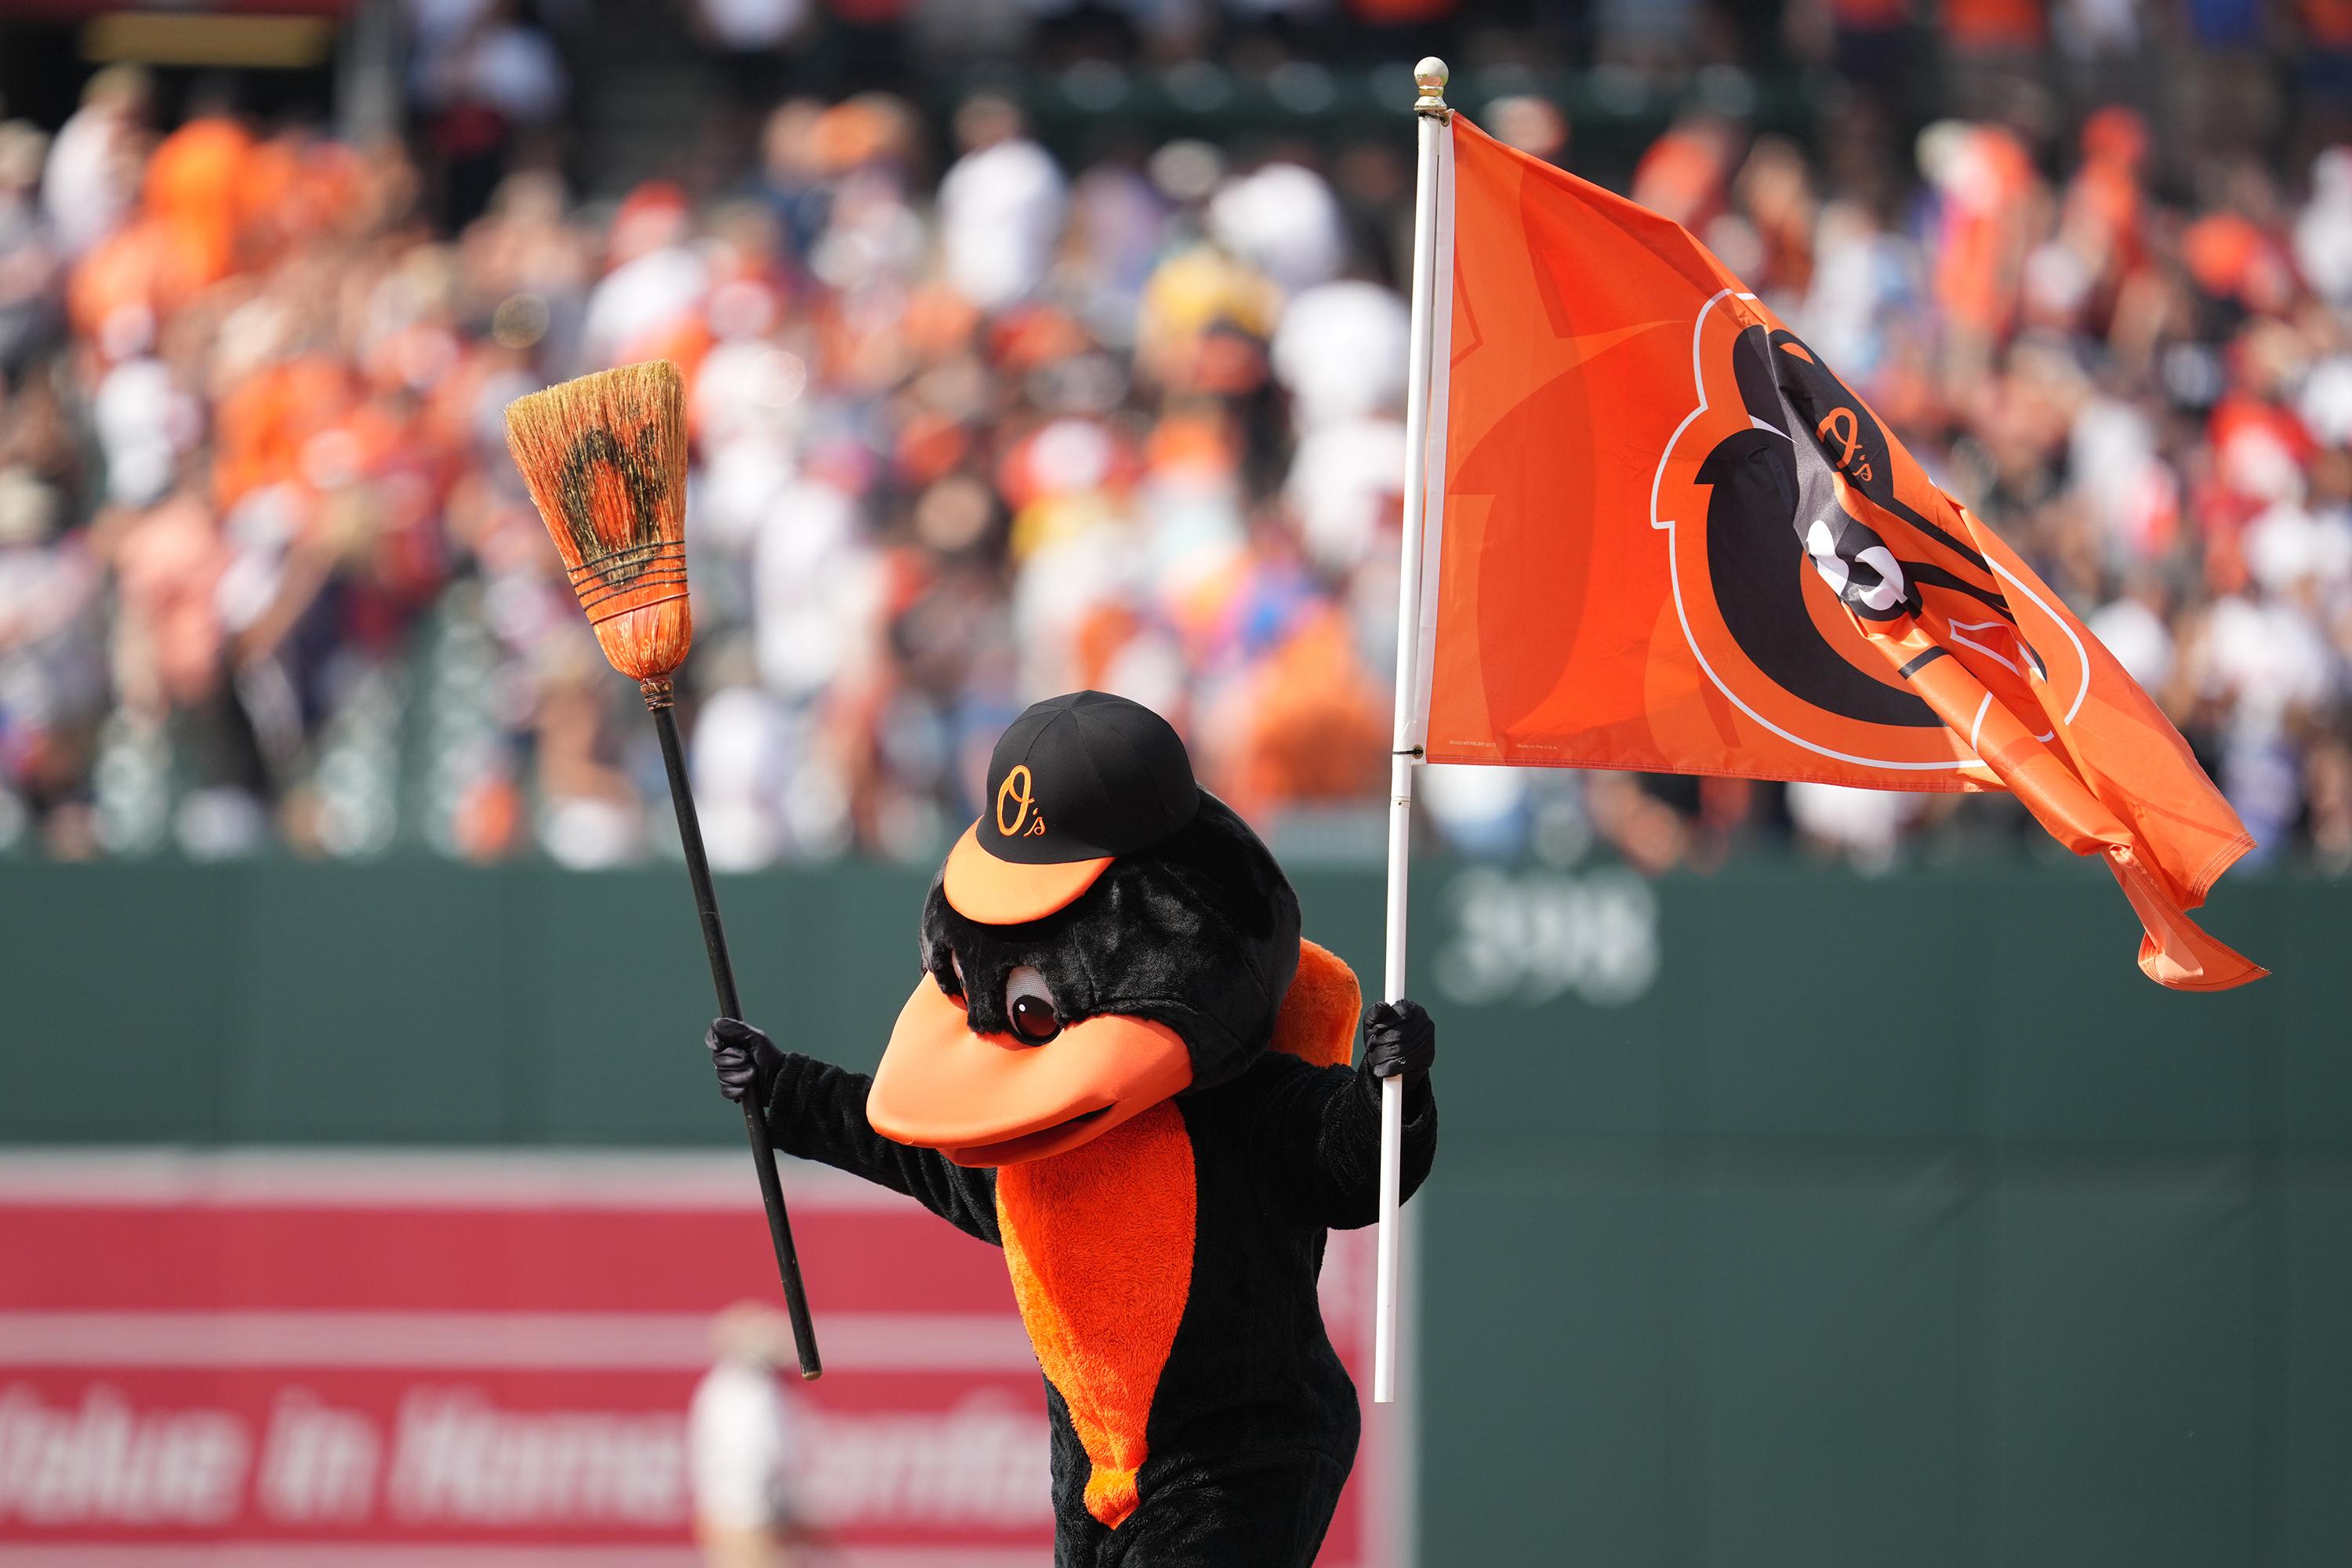 The Oriole Bird mascot shakes a broom and waves a flag with the O's logo on it.